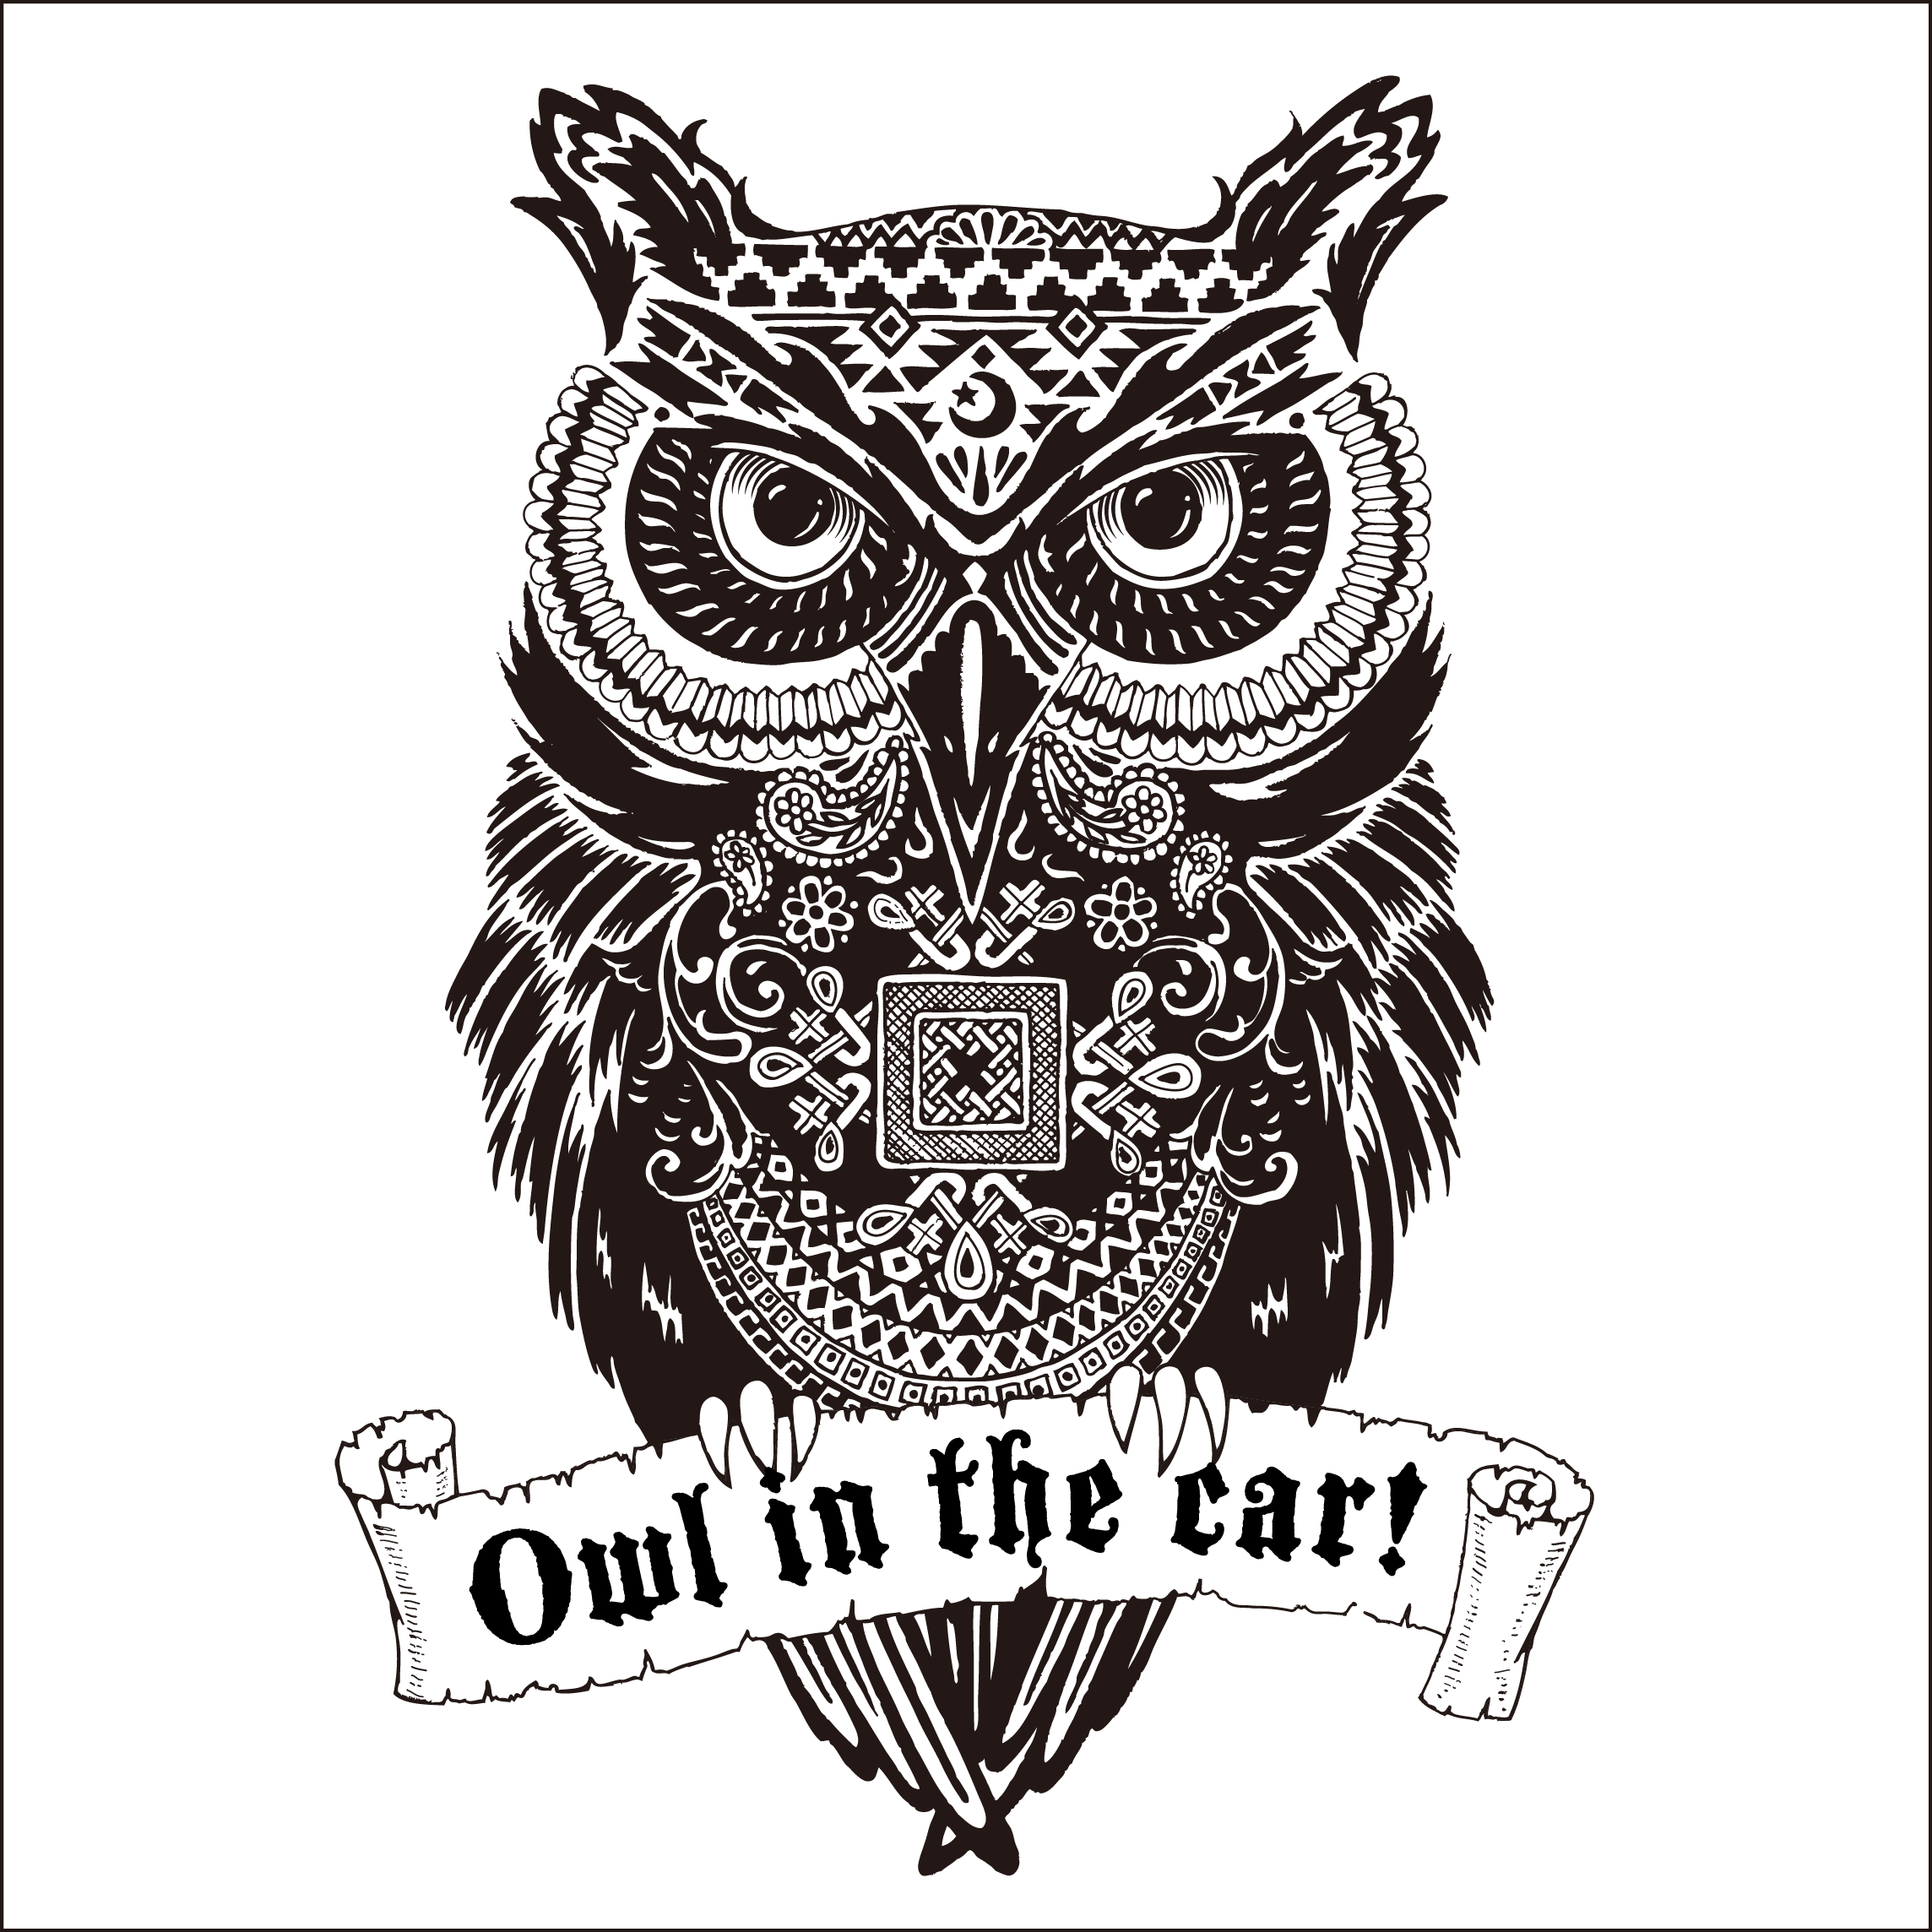 Folklore Owl Emi様 デザイン イラストコンペsns アトリエサーカス Ateliercircus Desktop Backgrounds Tattoo Minimalist 22x22 Png Clipart Download